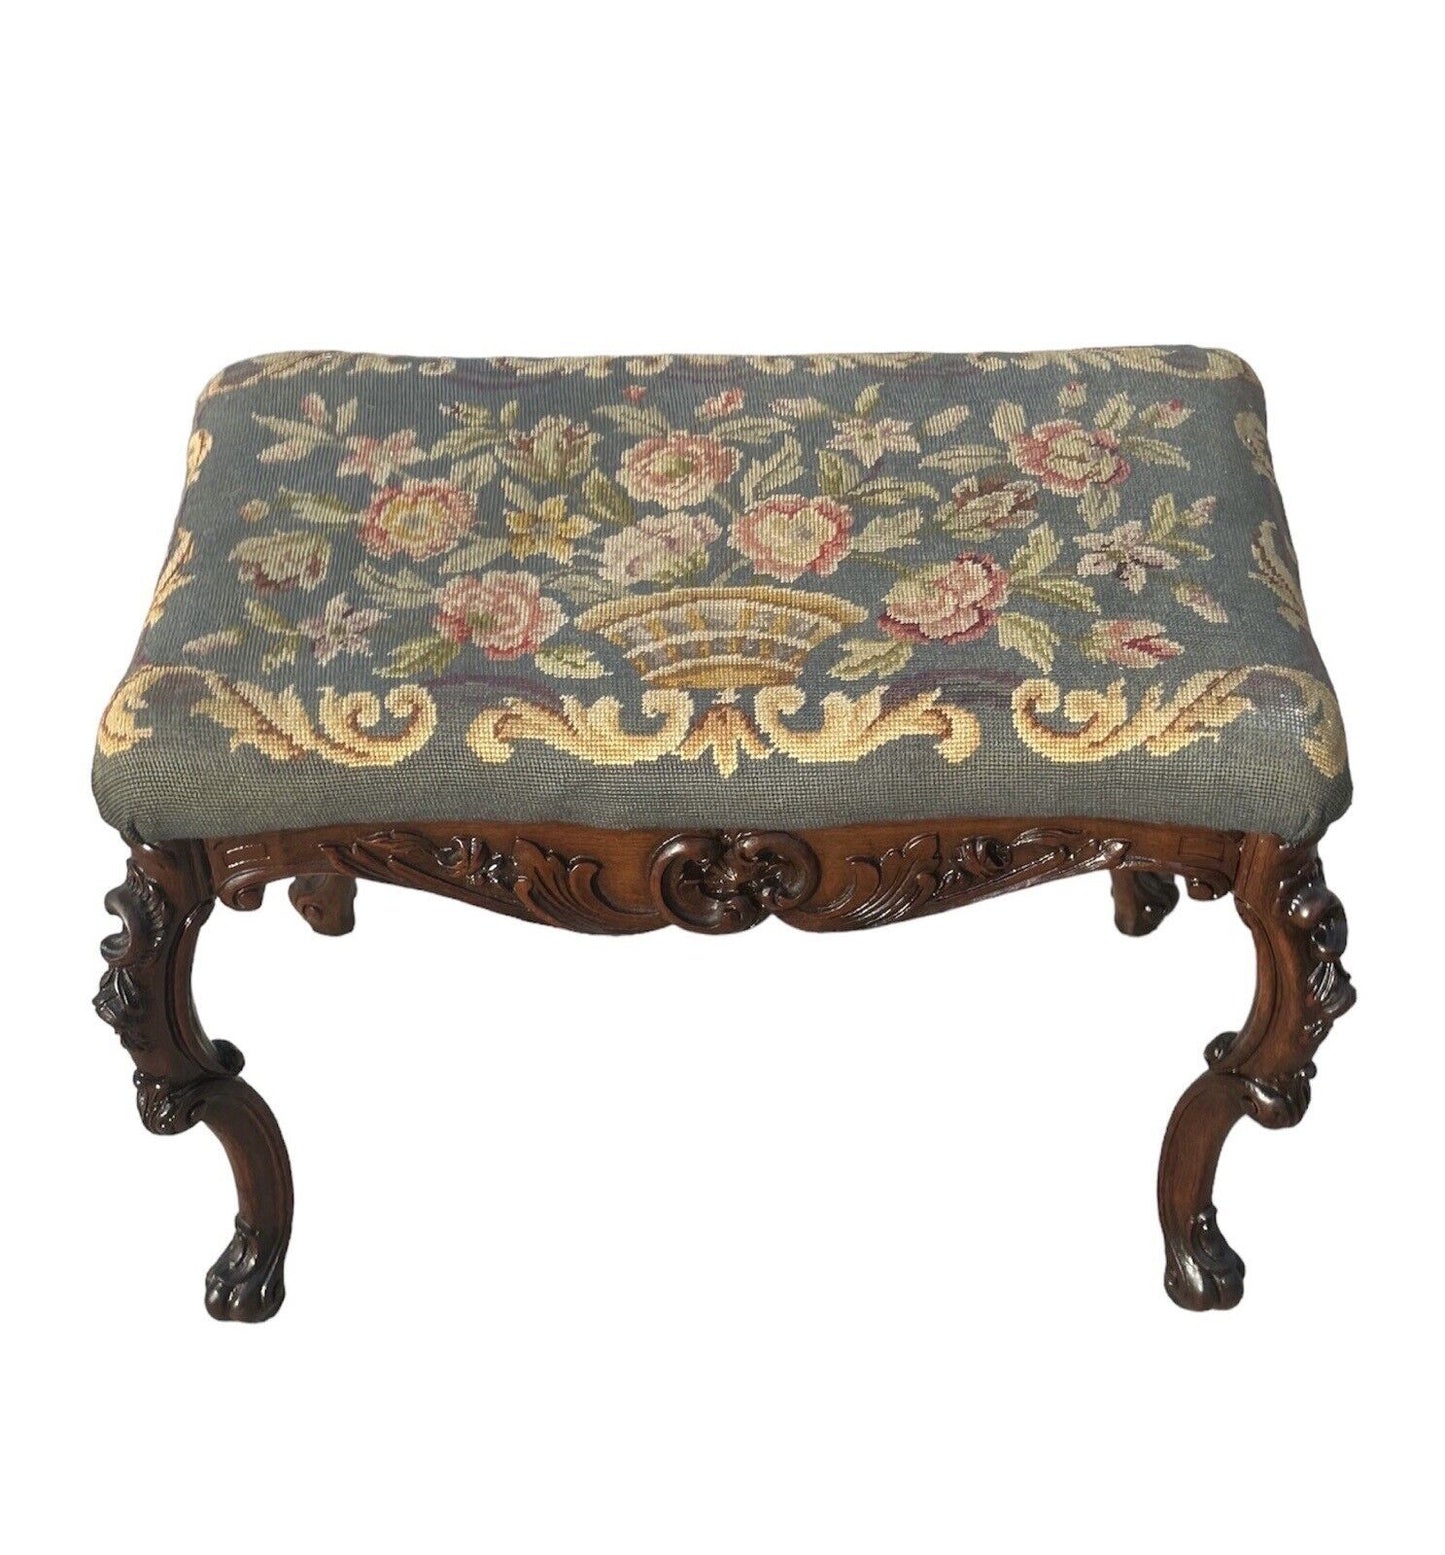 Antique French Louis XV Style Walnut Vanity Bench With Needlepoint Floral Basket